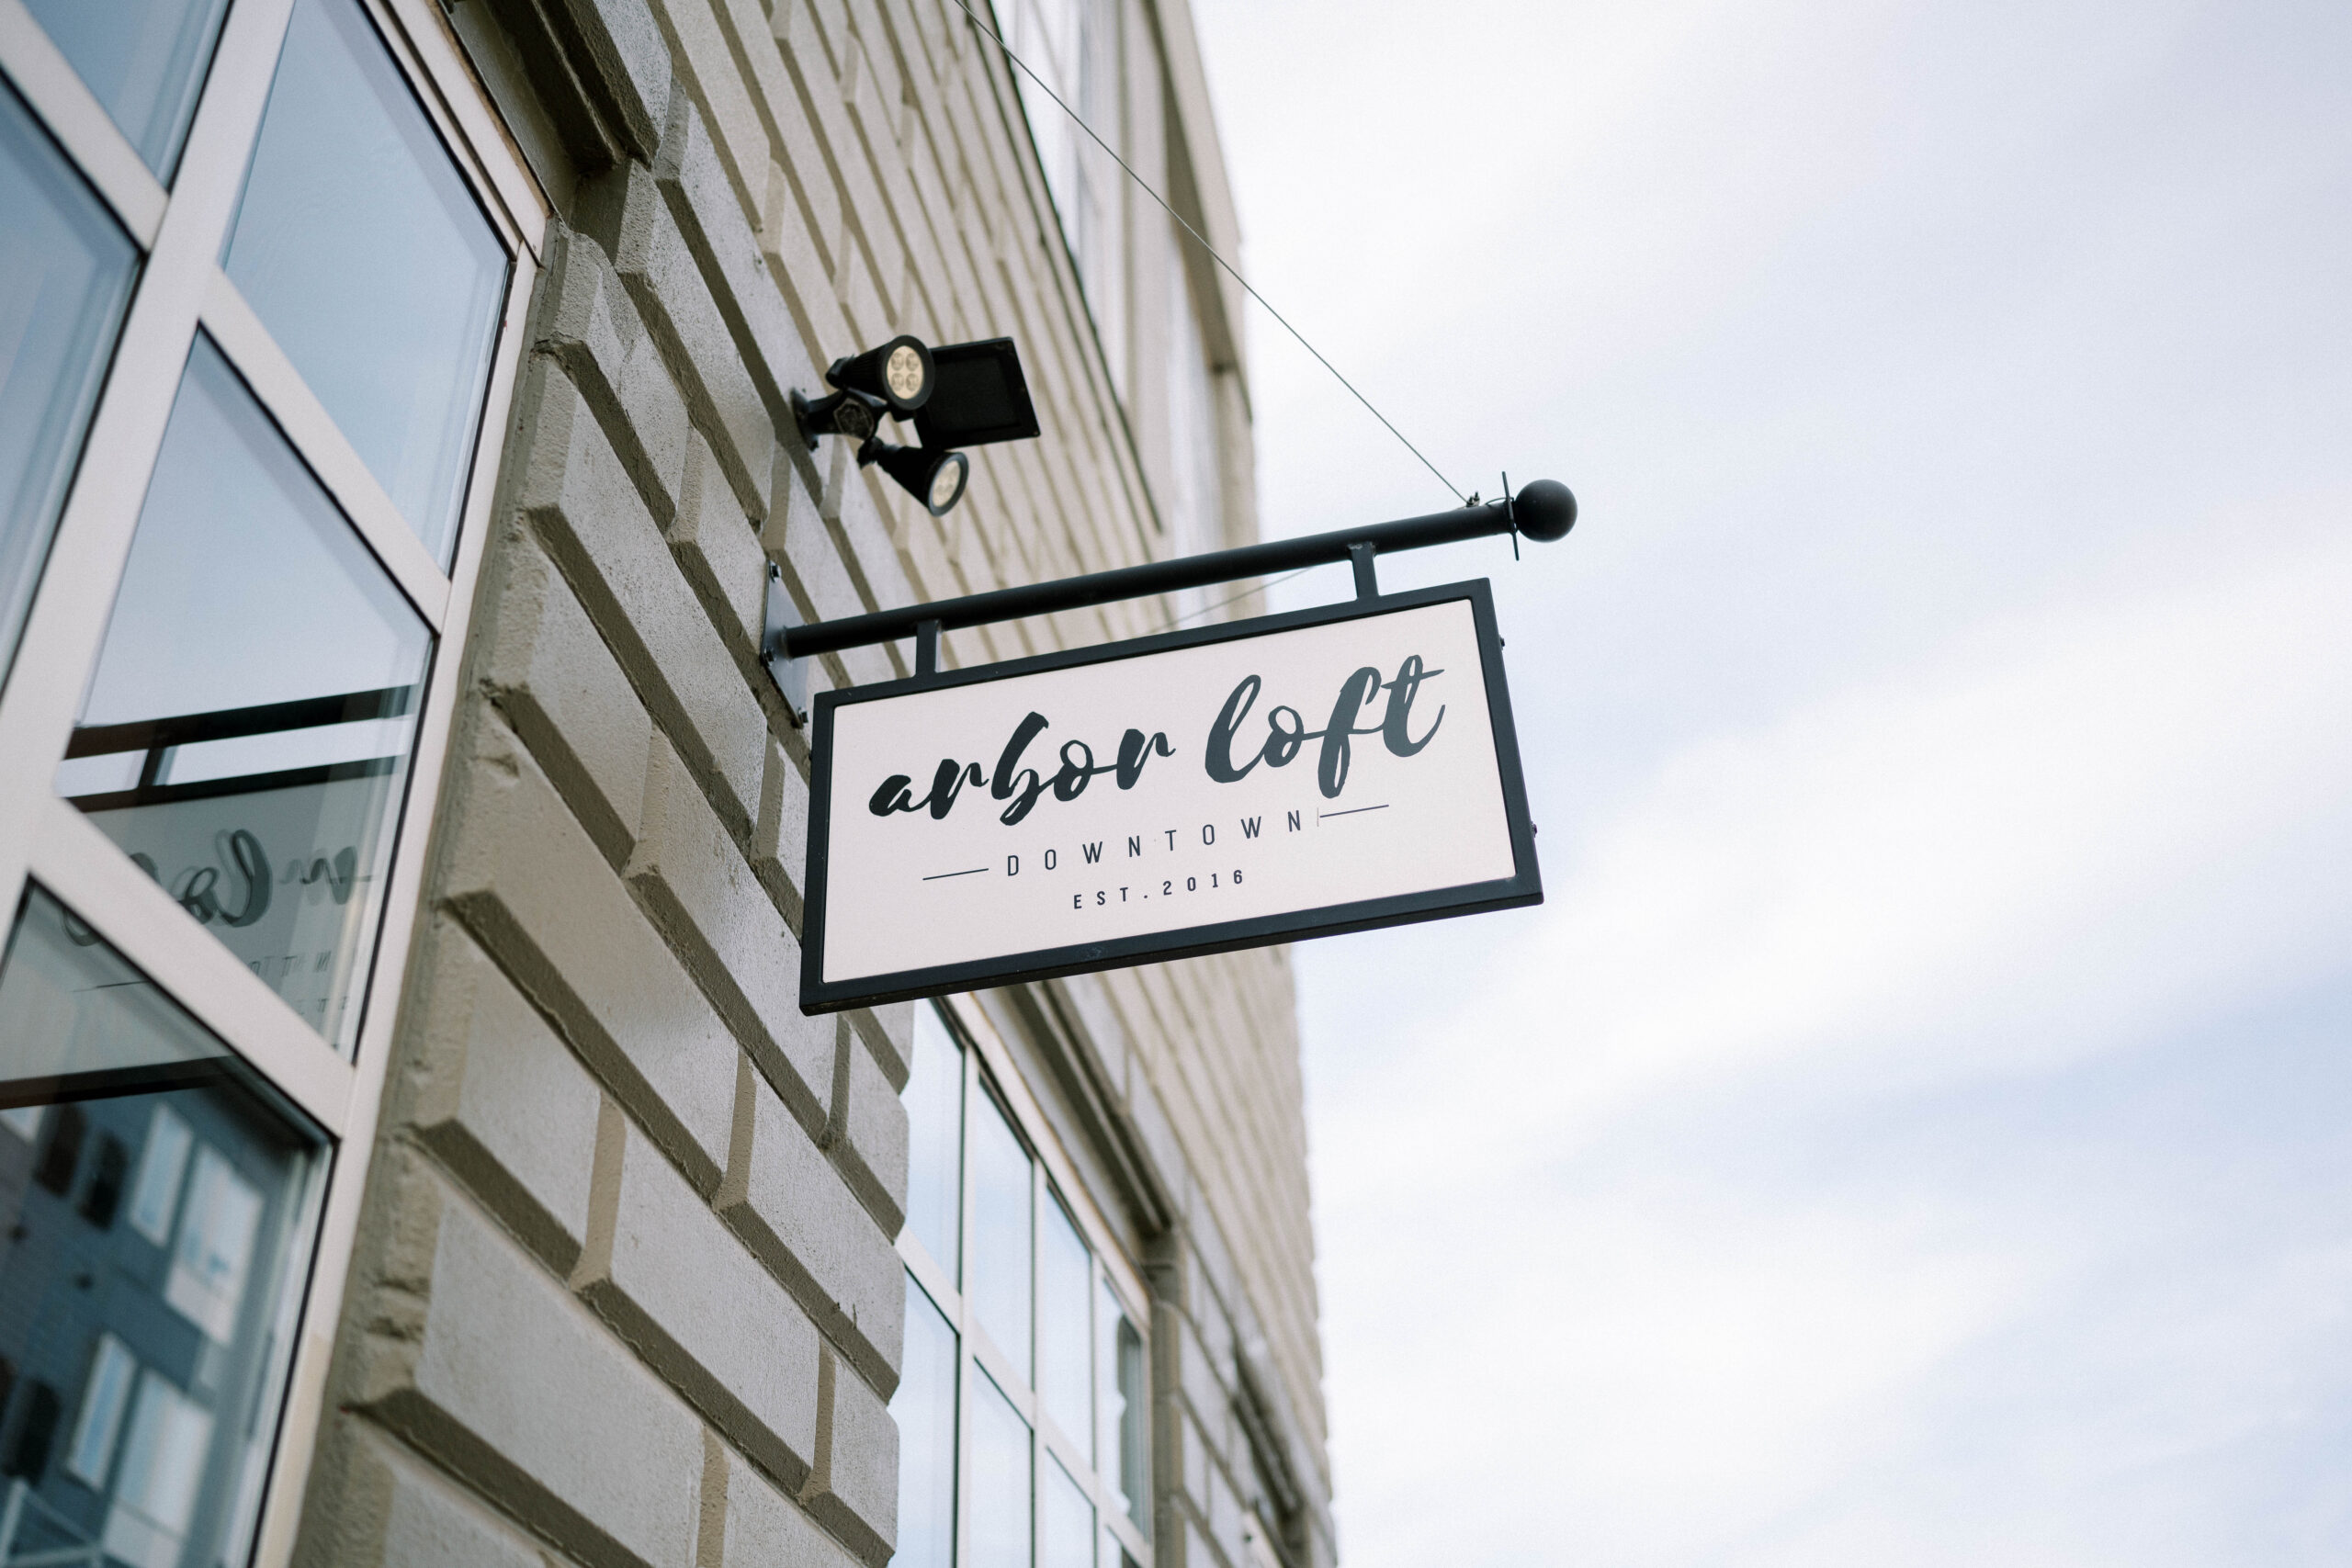 The arbor loft sign, in downtown Rochester